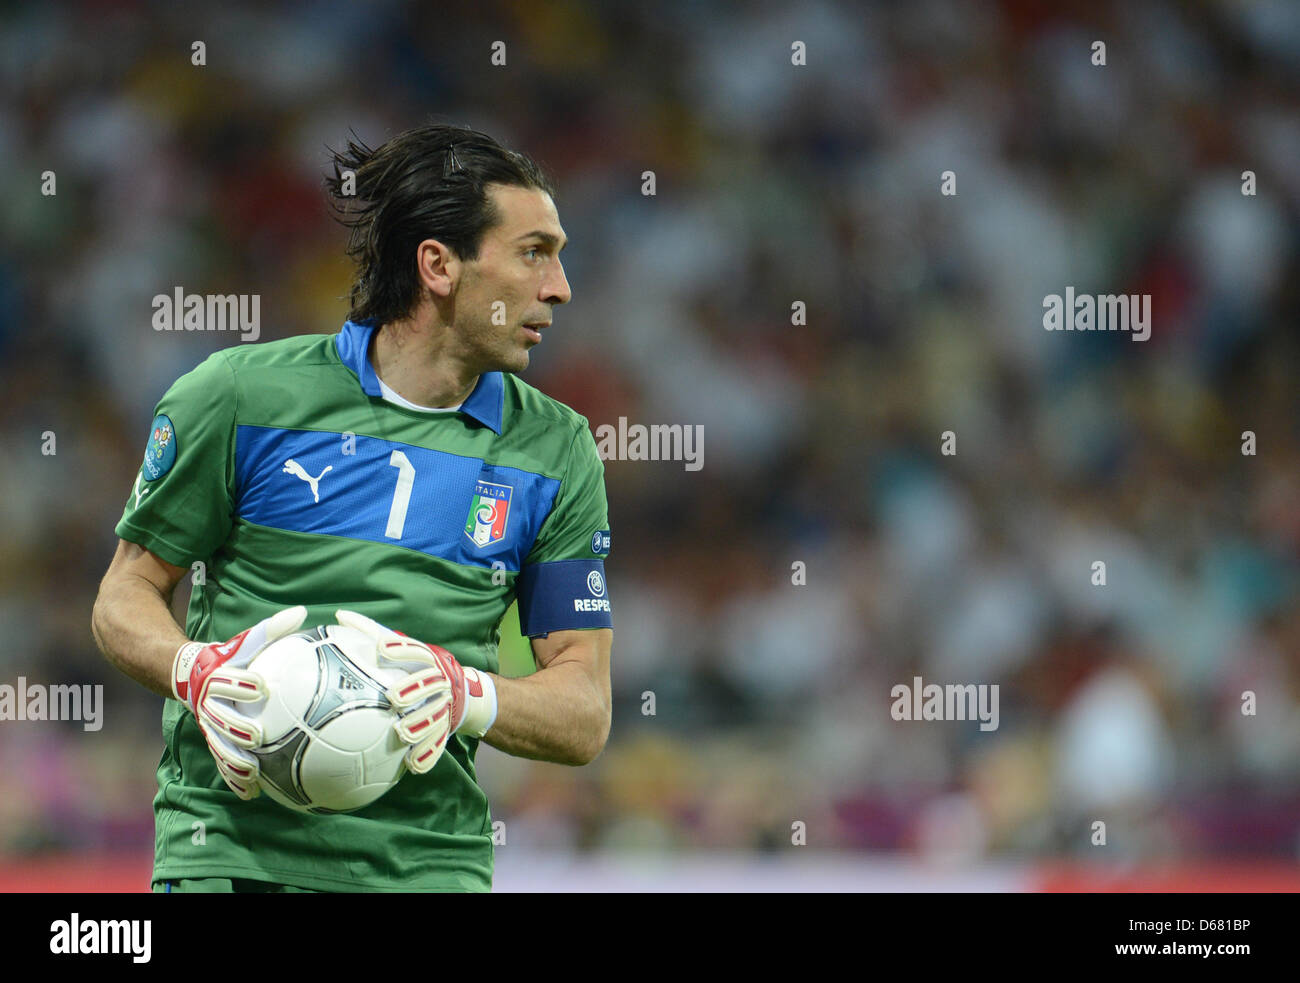 Italy's goalkeeper Gianluigi Buffon during the UEFA EURO 2012 final soccer match Spain vs. Italy at the Olympic Stadium in Kiev, Ukraine, 01 July 2012. Photo: Andreas Gebert dpa (Please refer to chapters 7 and 8 of http://dpaq.de/Ziovh for UEFA Euro 2012 Terms & Conditions) Stock Photo